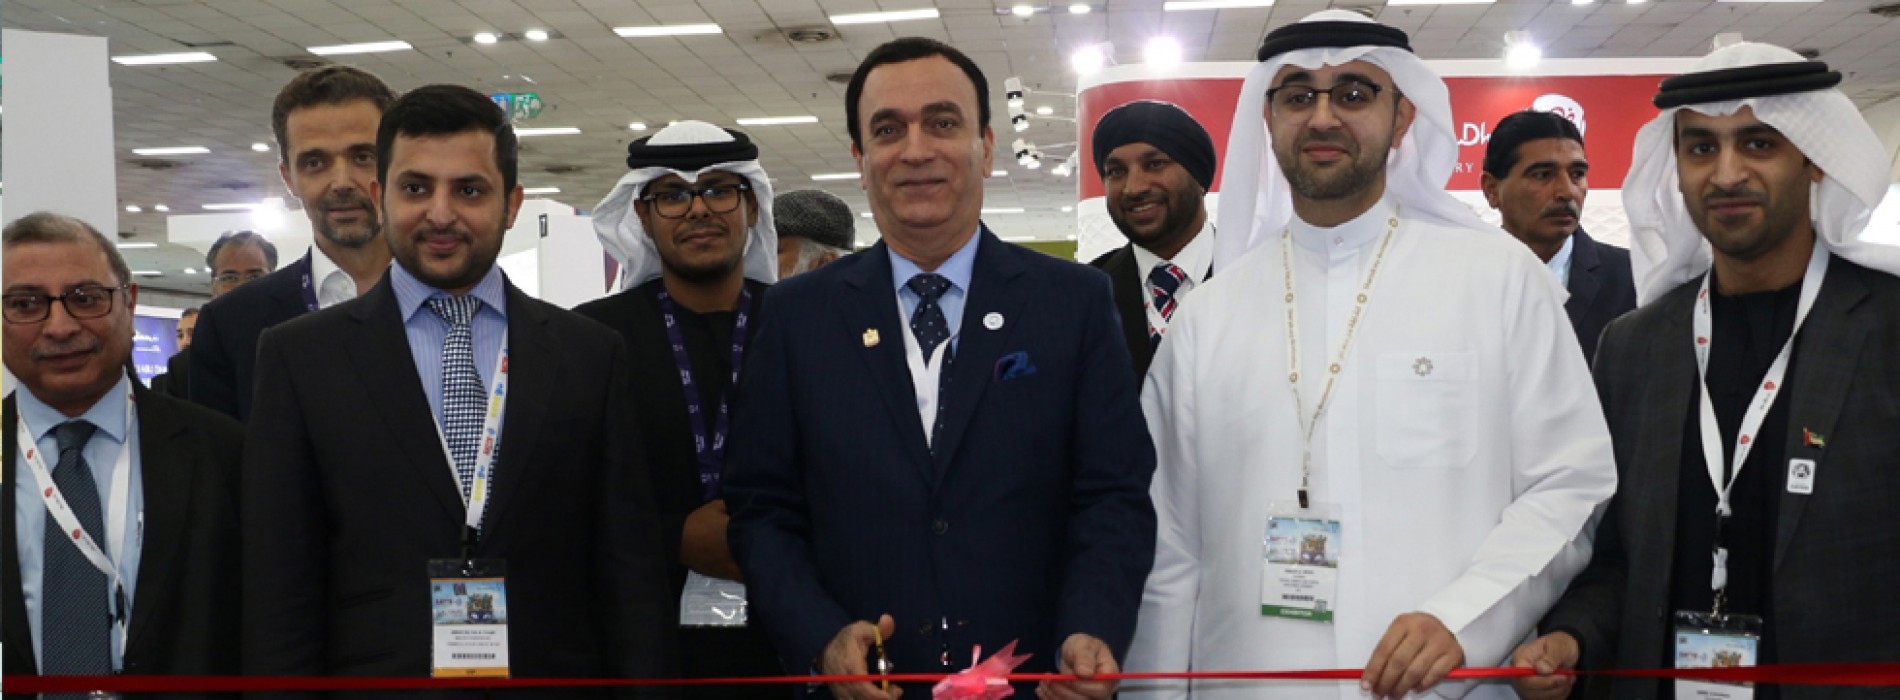 Abu Dhabi had a successful participation at the SATTE event